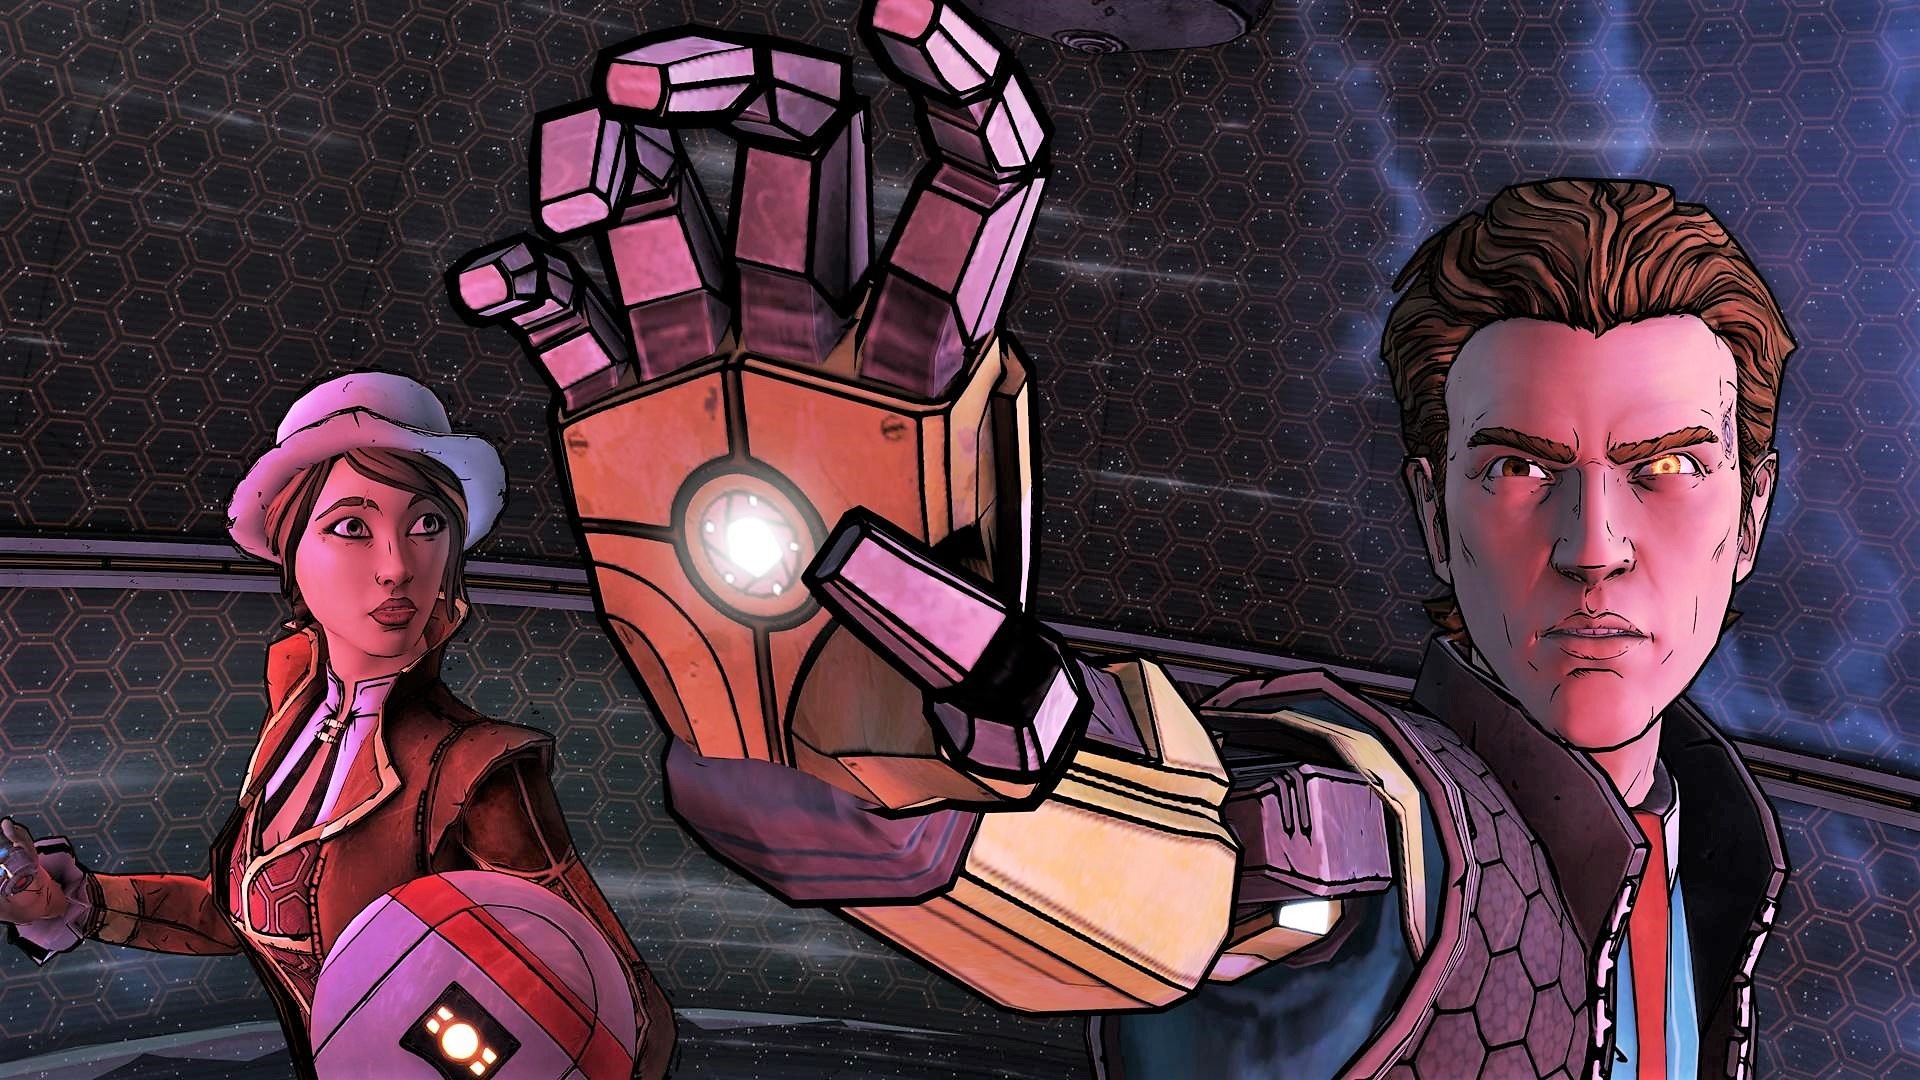 #Borderlands – Tales from the Borderlands wird 2022 fortgesetzt – doch alles wird anders